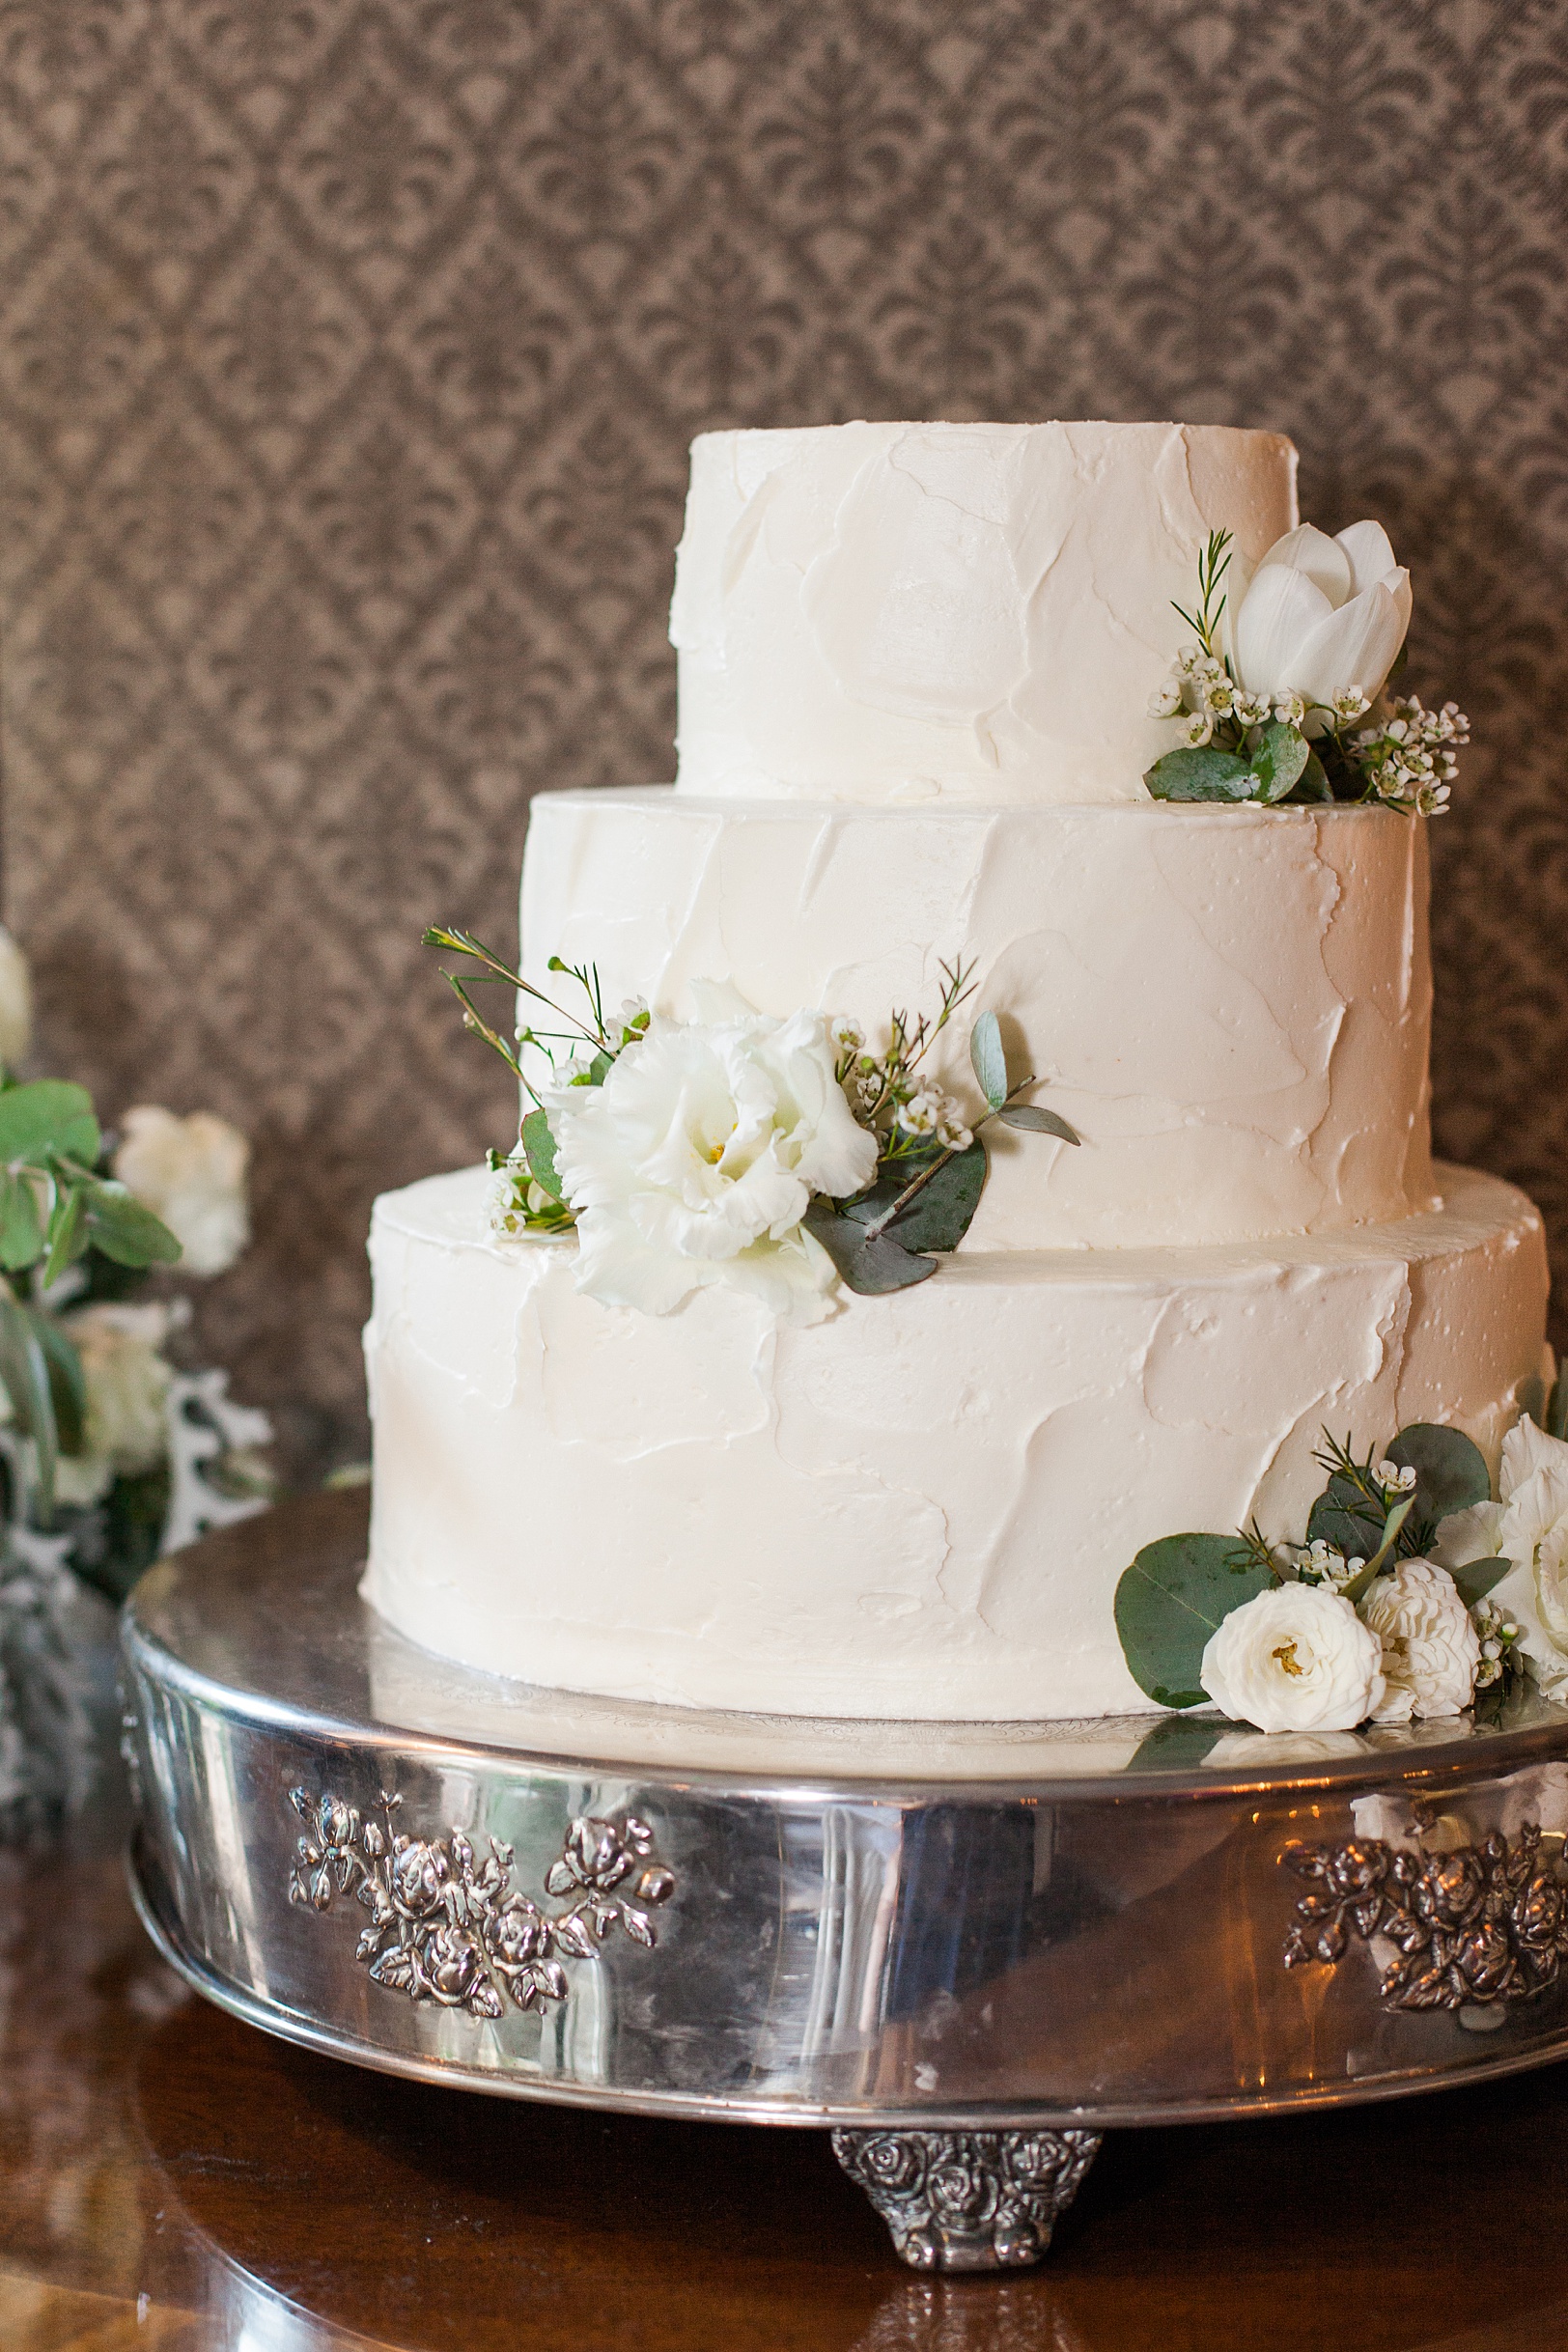 Planters Inn Reception Details of Cake in Charleston by Kaitlin Scott Photography